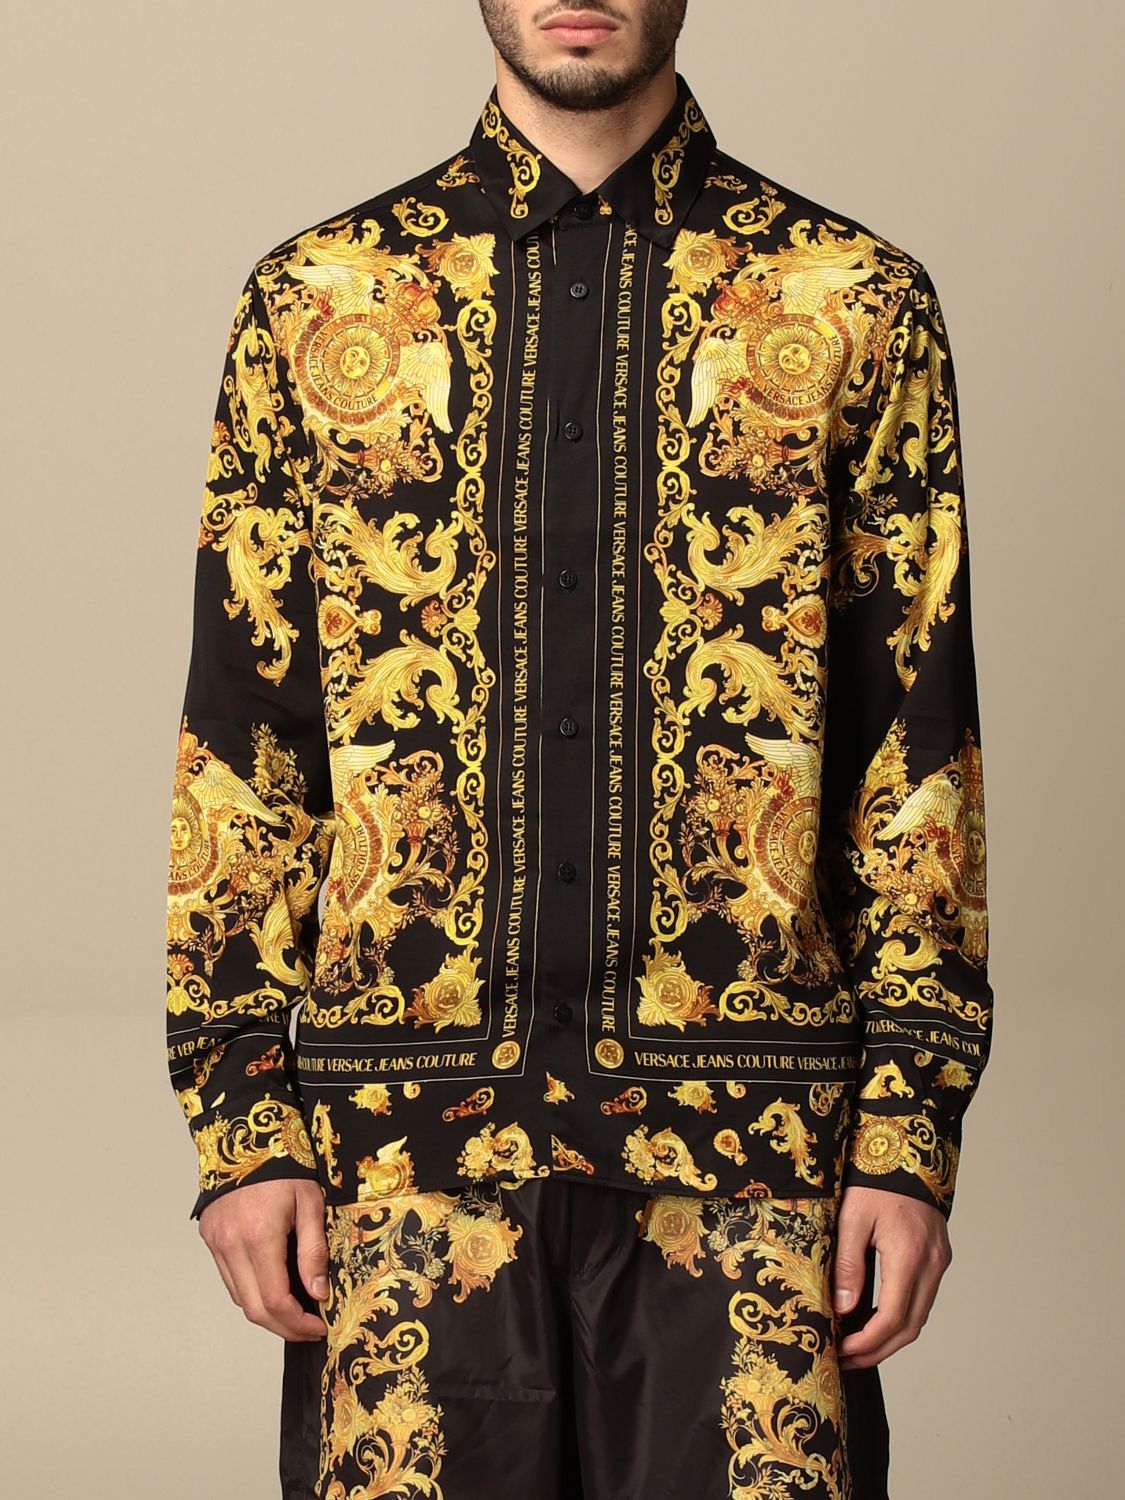 VERSACE JEANS COUTURE: shirt with baroque pattern - Black | Shirt Versace Jeans Couture 